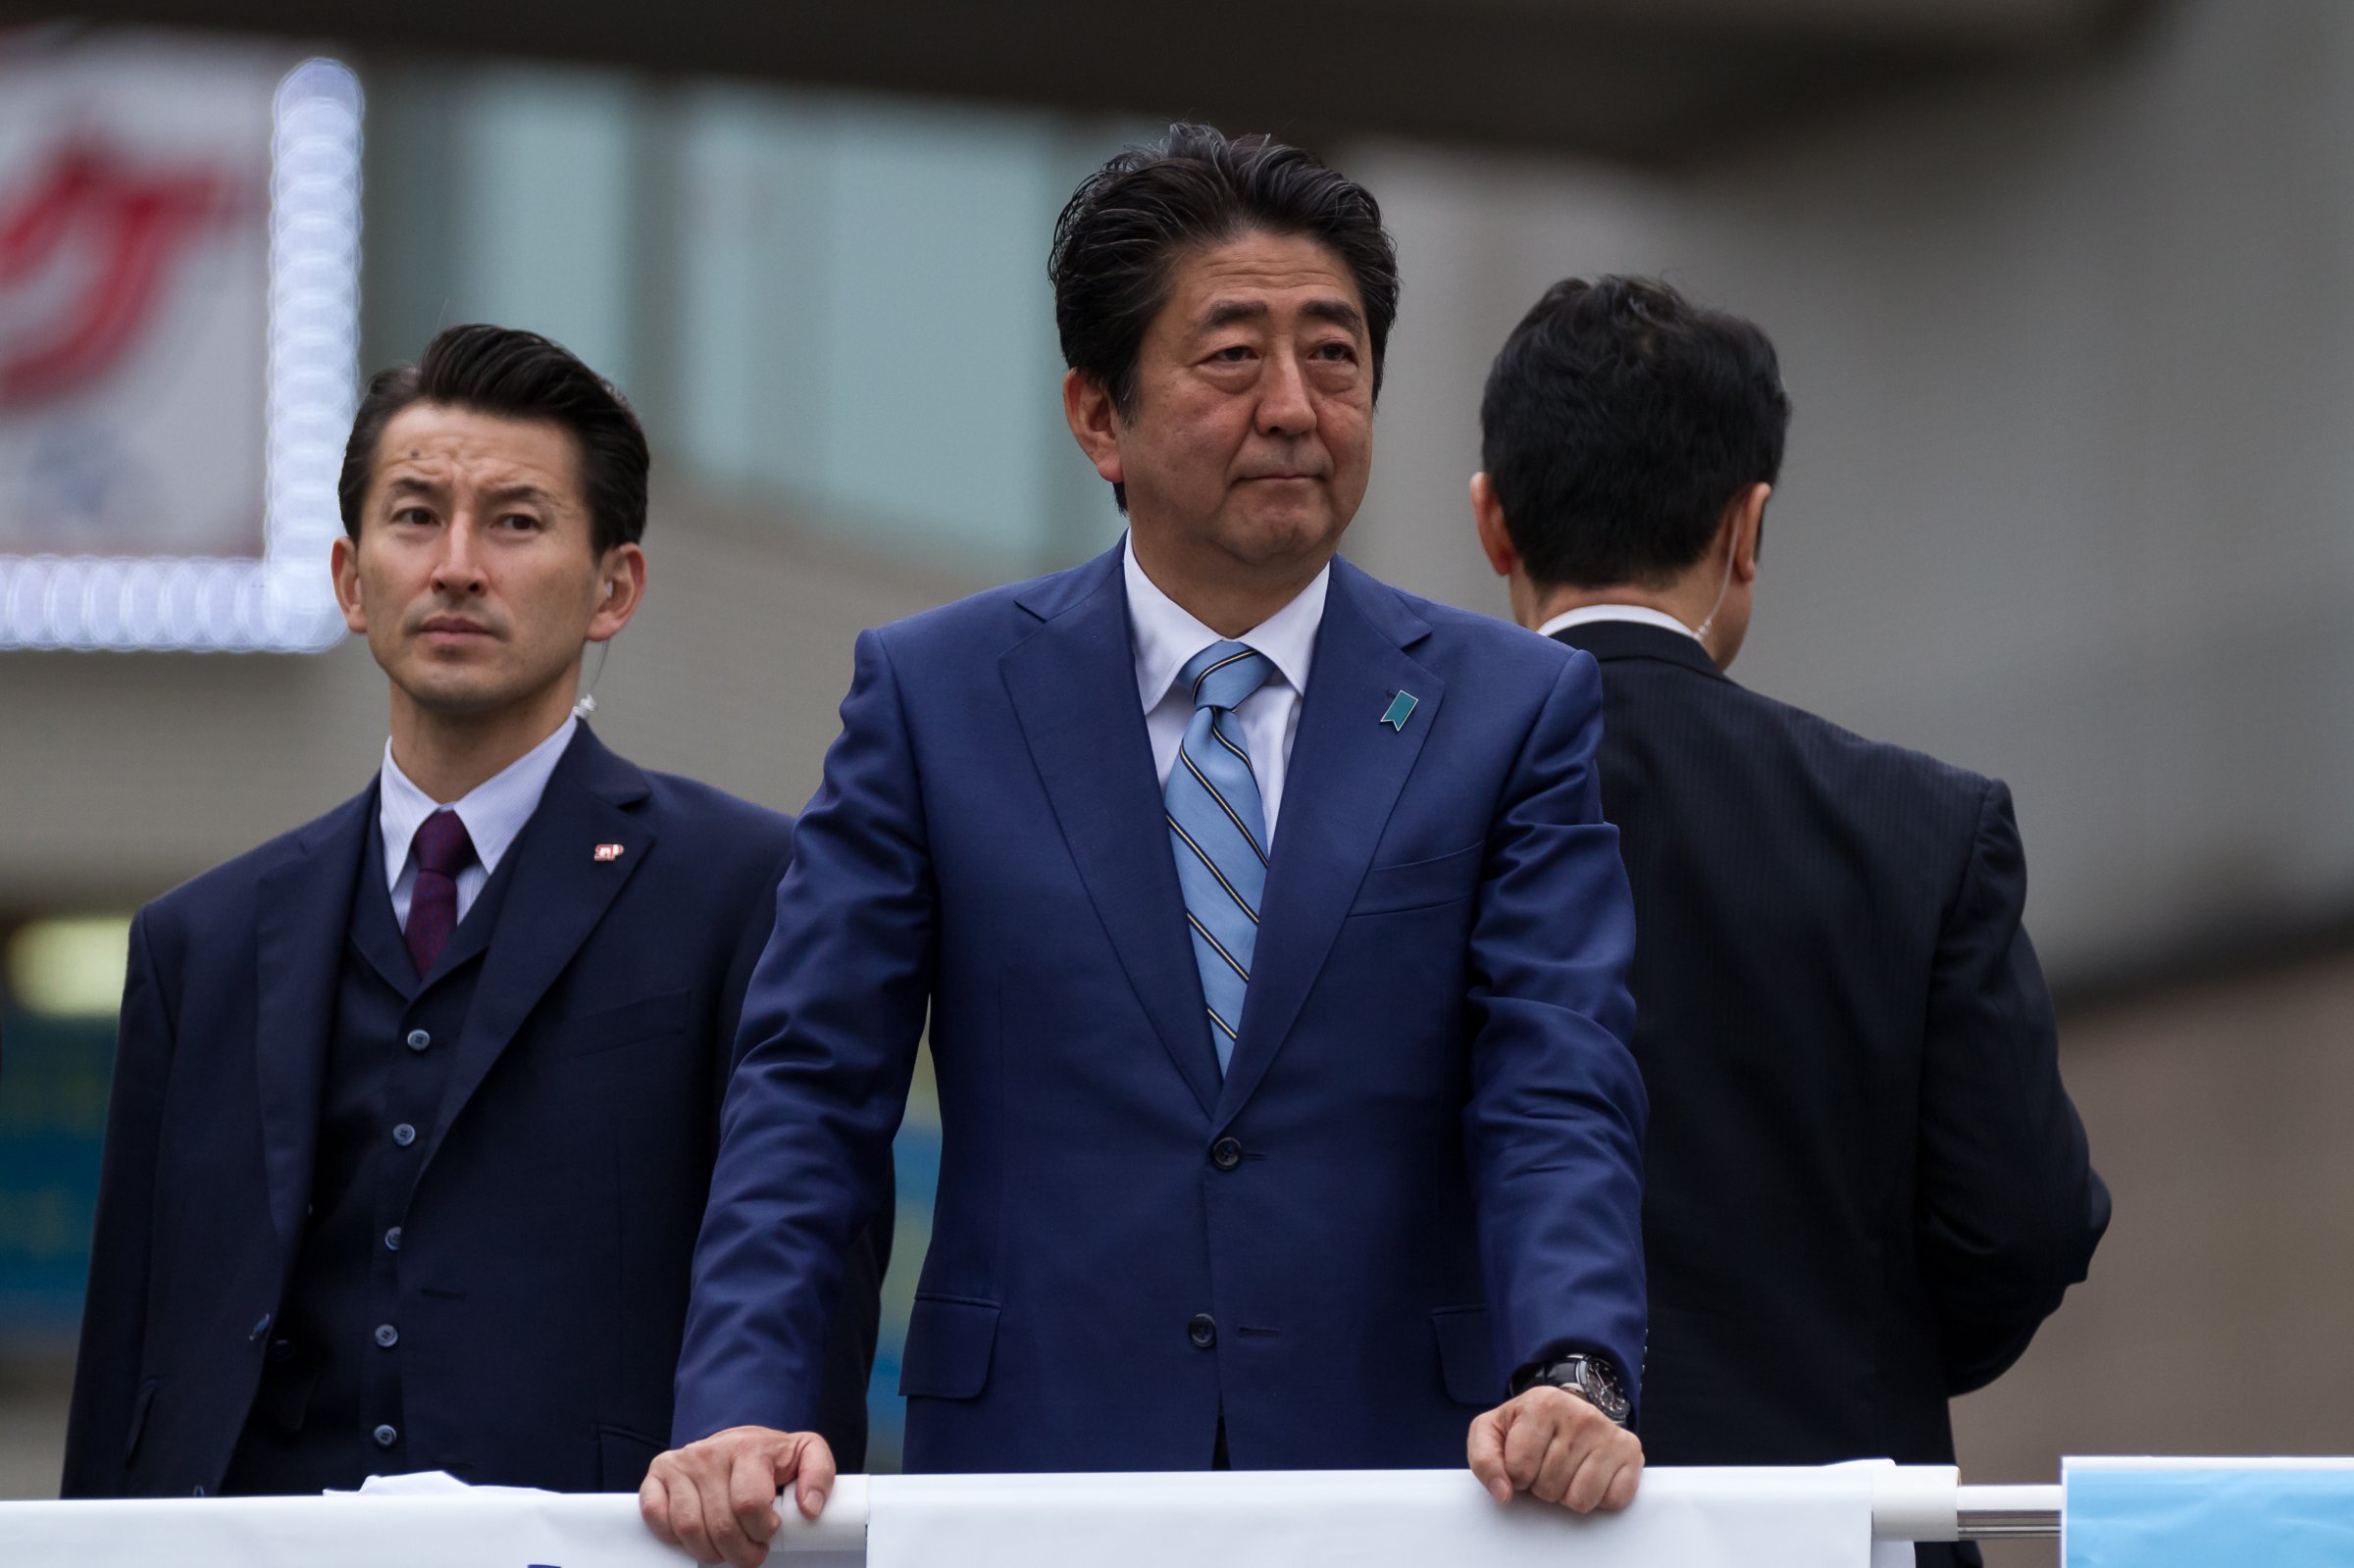 Shinzo Abe electioneering in support of candidates from the ruling Liberal Democratic Party